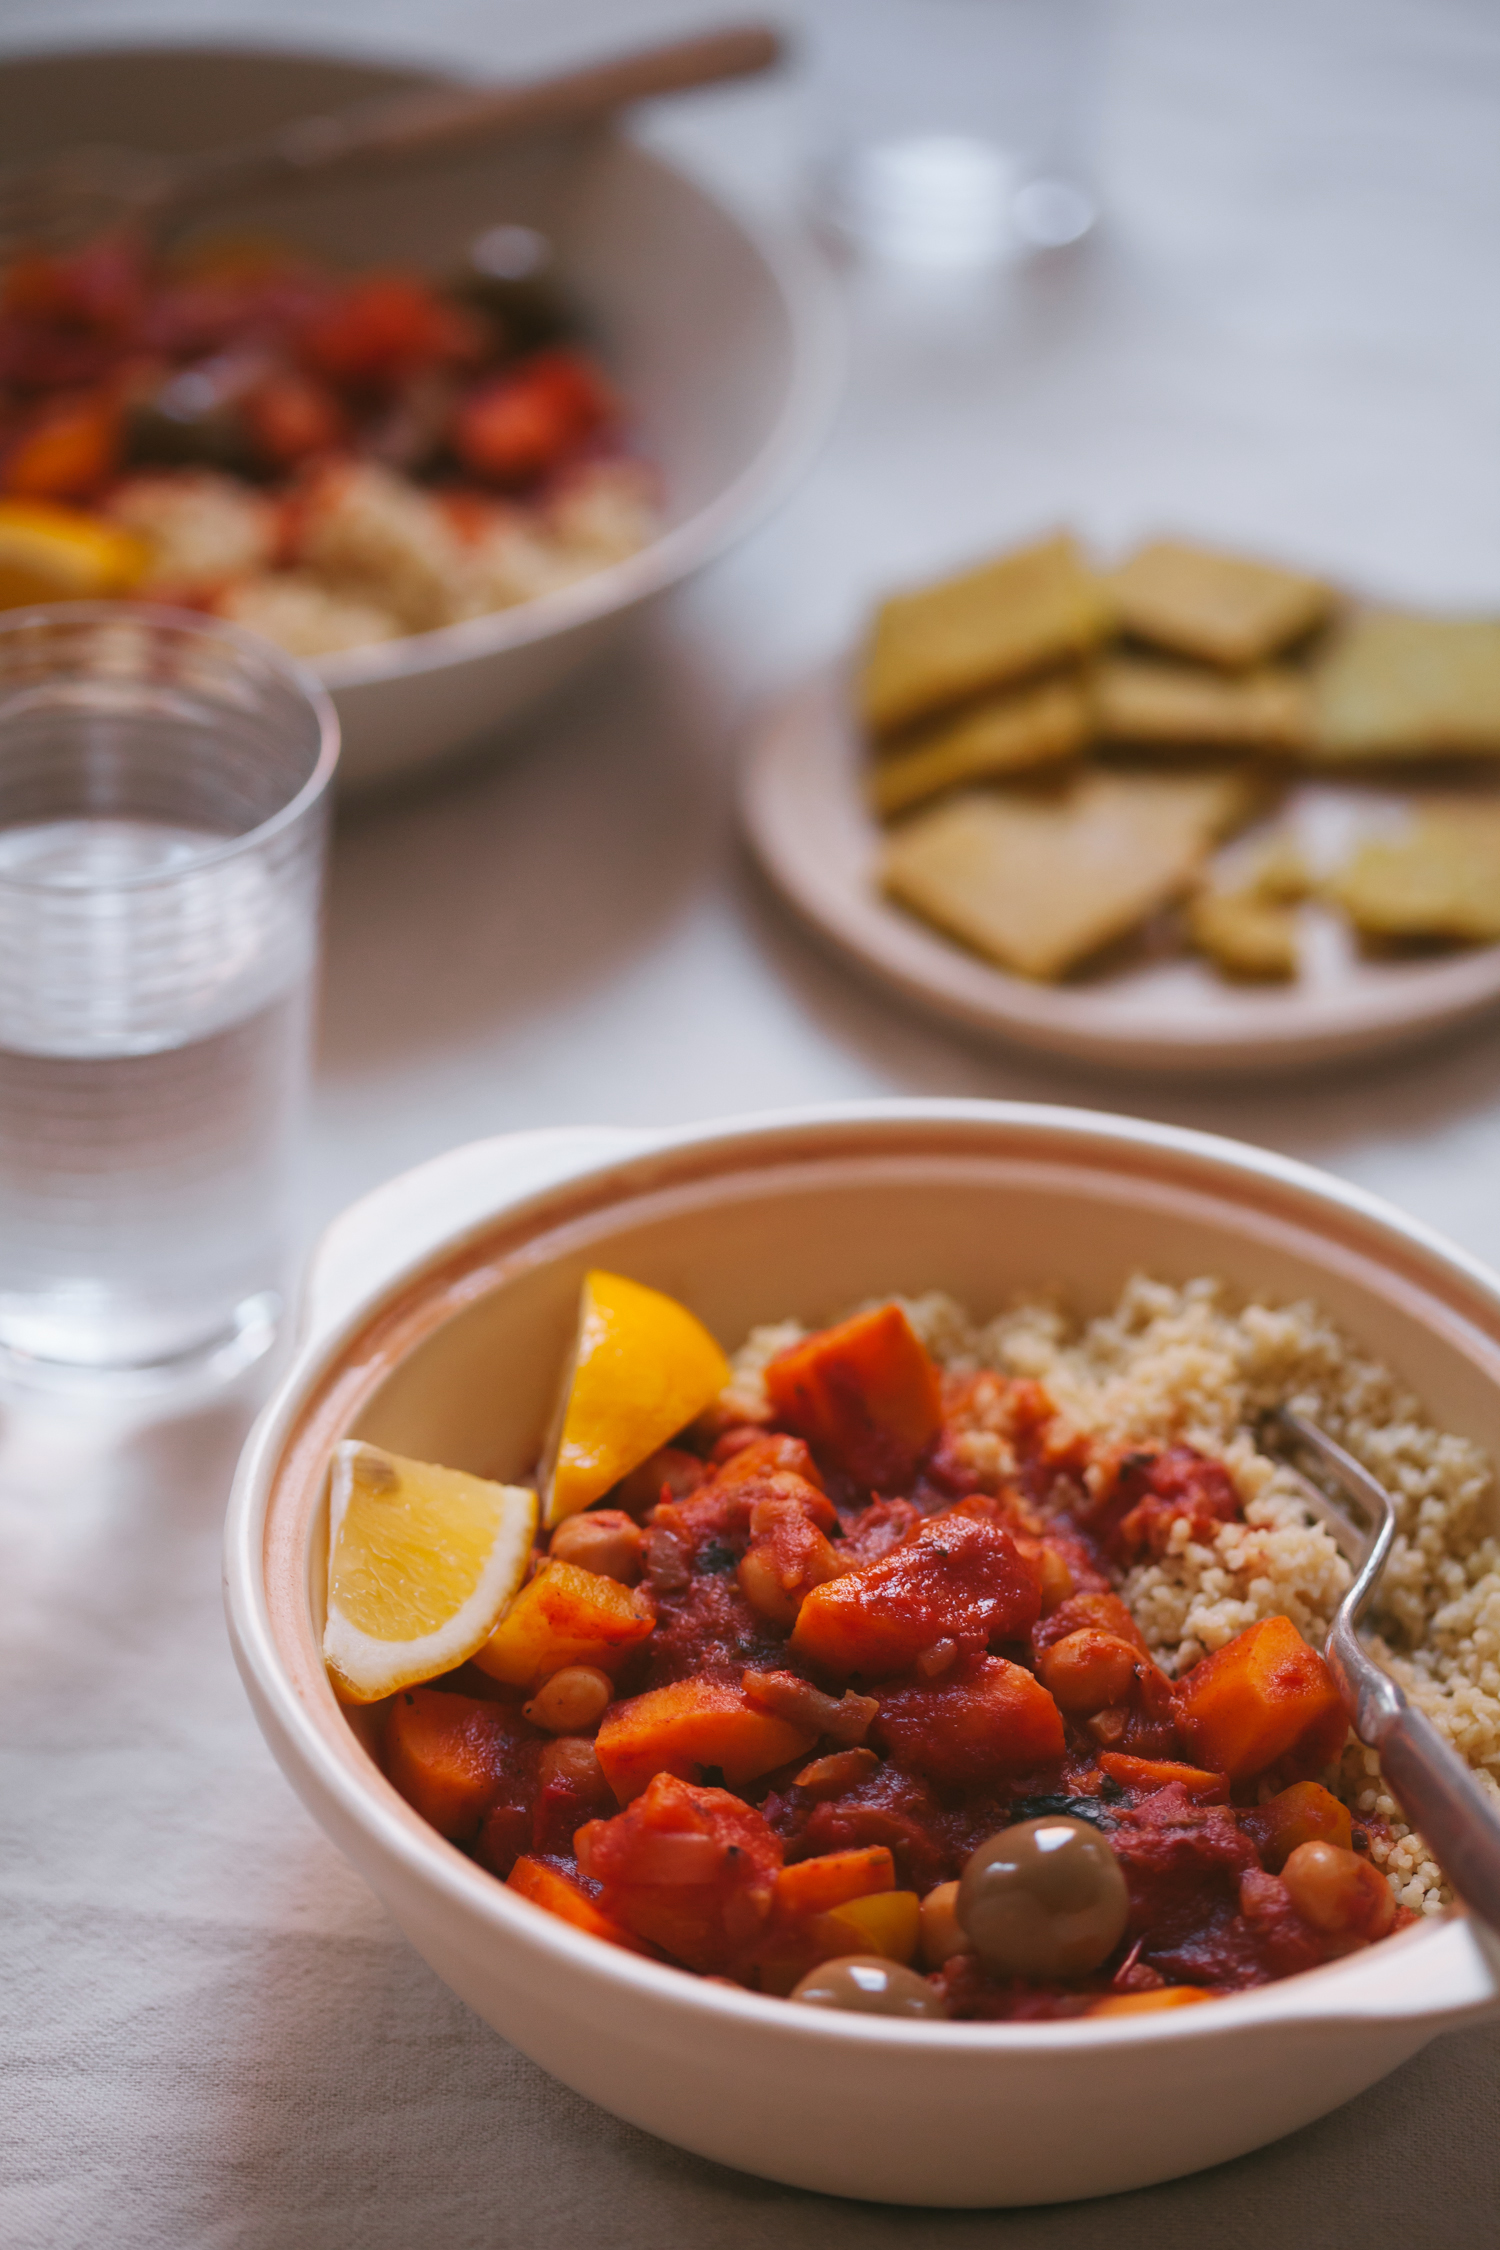 Moroccan Stew and Sunshine Crackers from The First Mess + a Giveaway - Golubka Kitchen